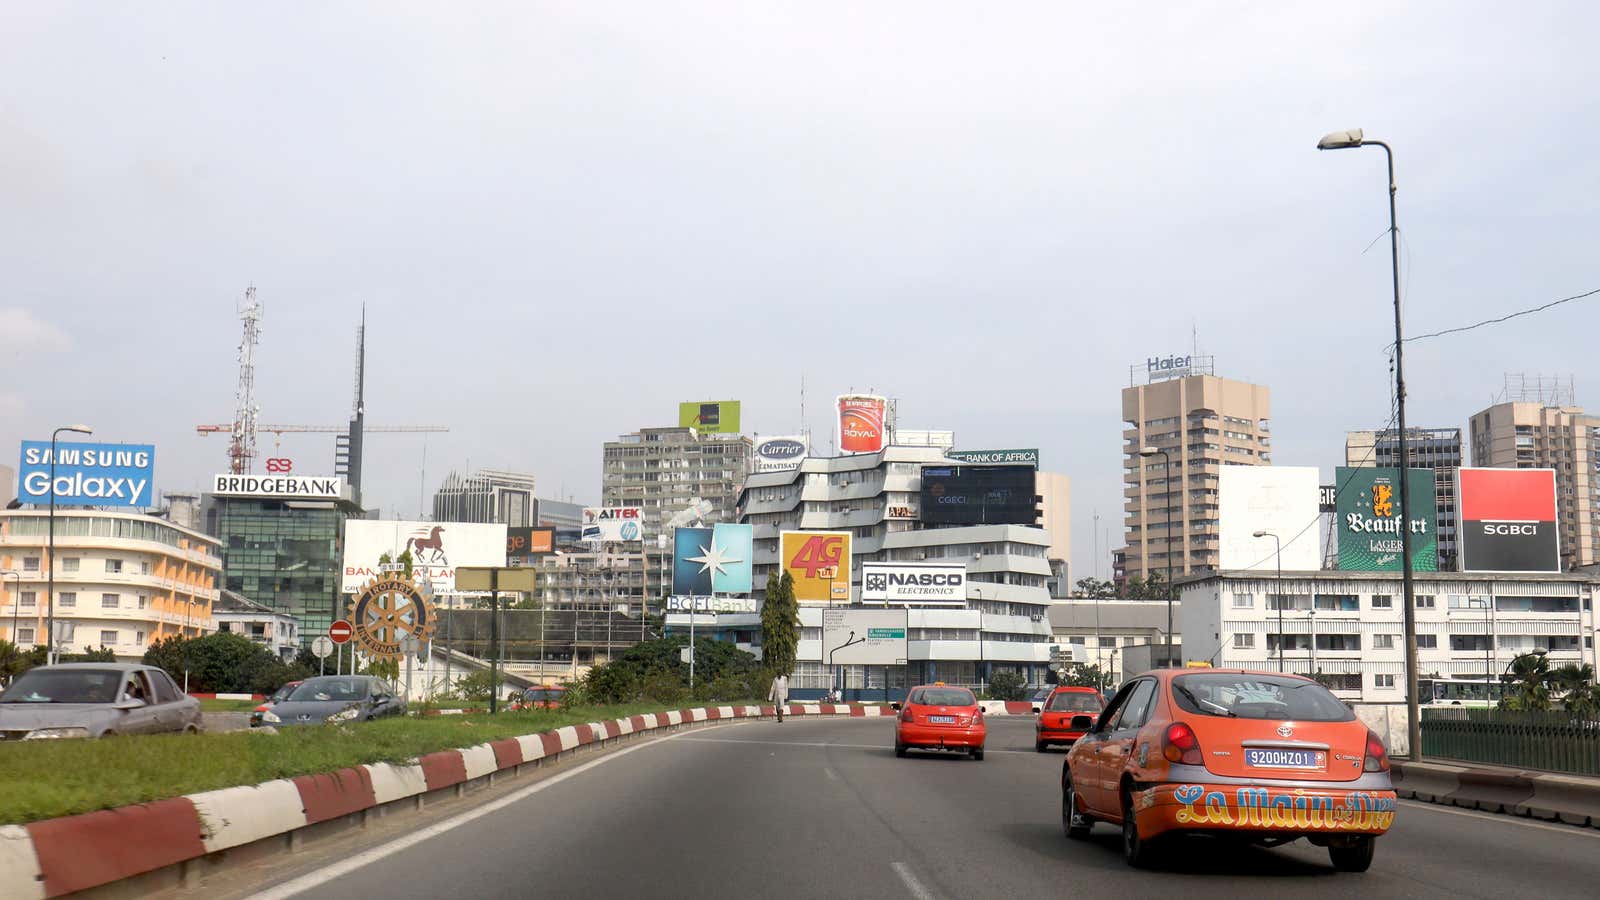 Côte d’Ivoire is one of the world’s fastest-growing economies